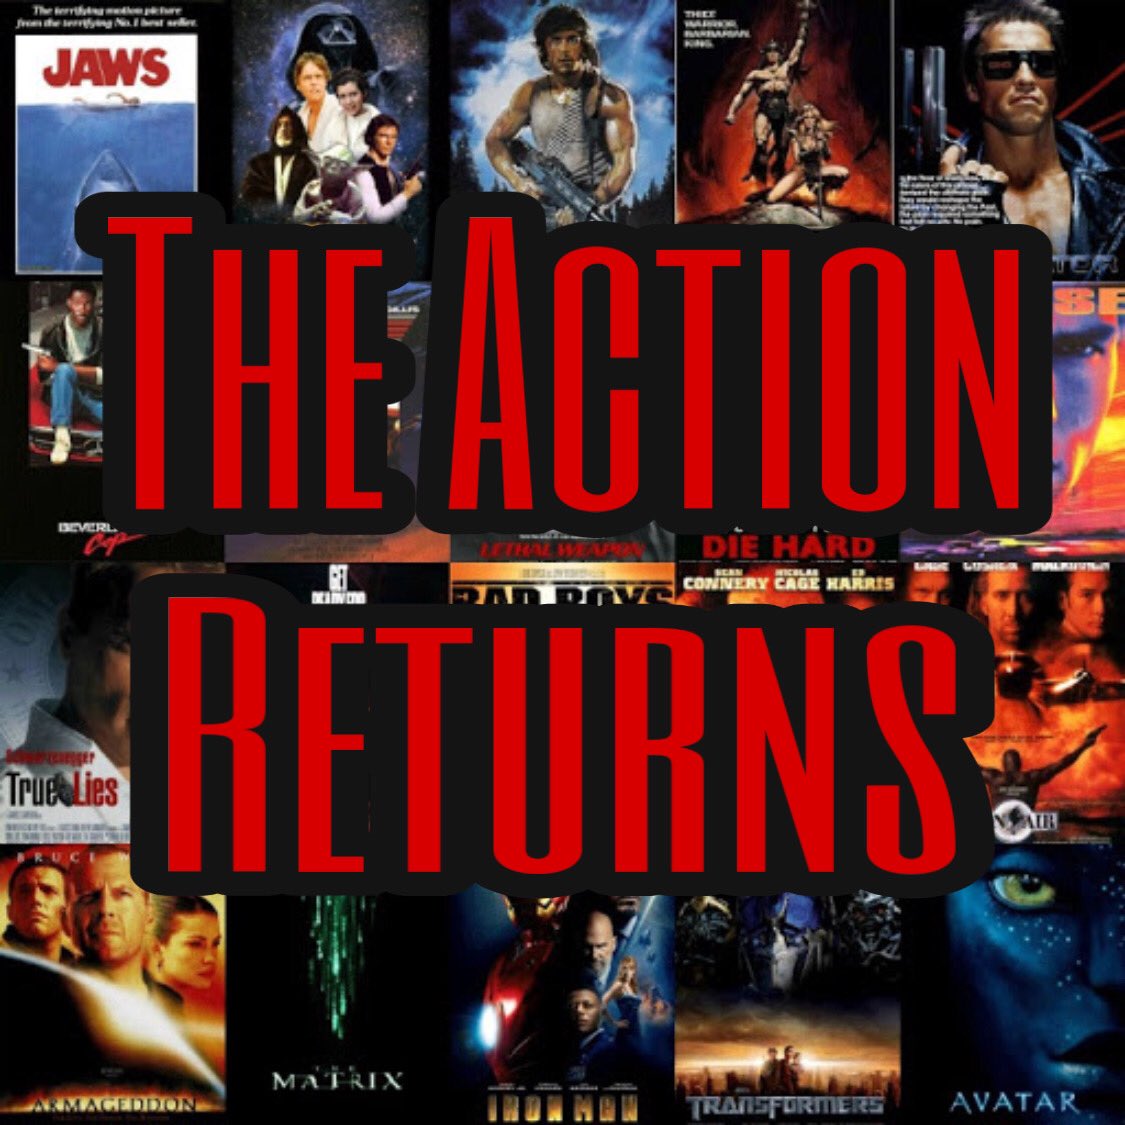 Subscribe & download to hear all of our new & past episodes of #TheActionReturns!

#TheHorrorReturns #THRPodcastNetwork #Action #ActionMovies #ActionSeries #ActionMoviePodcast #Podcast #Podcasting #PodLife #PodernFamily #PodcastHQ #PodNation

open.spotify.com/show/3Rx0jIgNn…